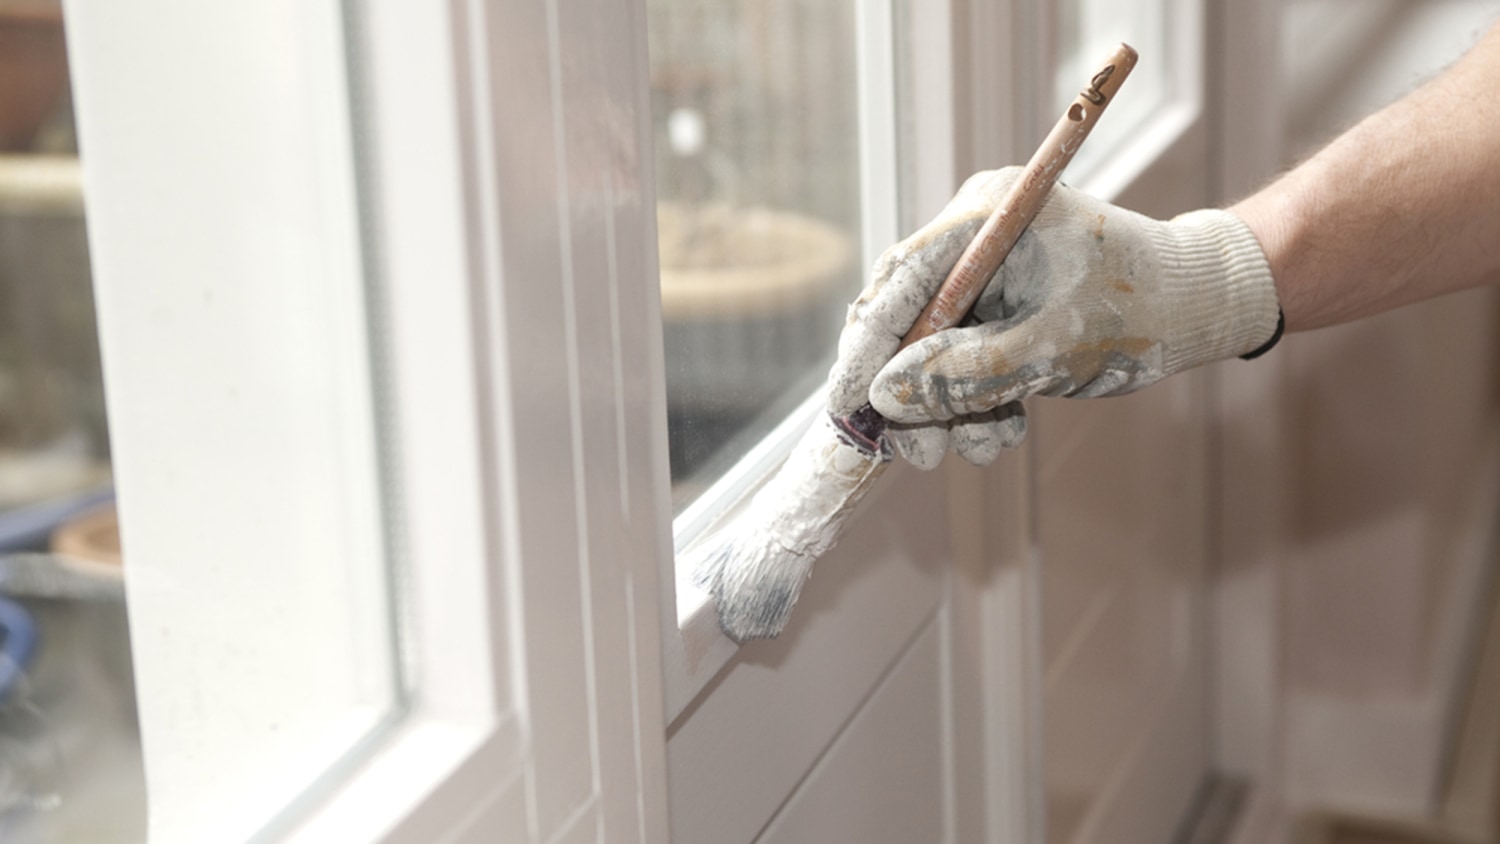 How to protect glass when painting and more home advice